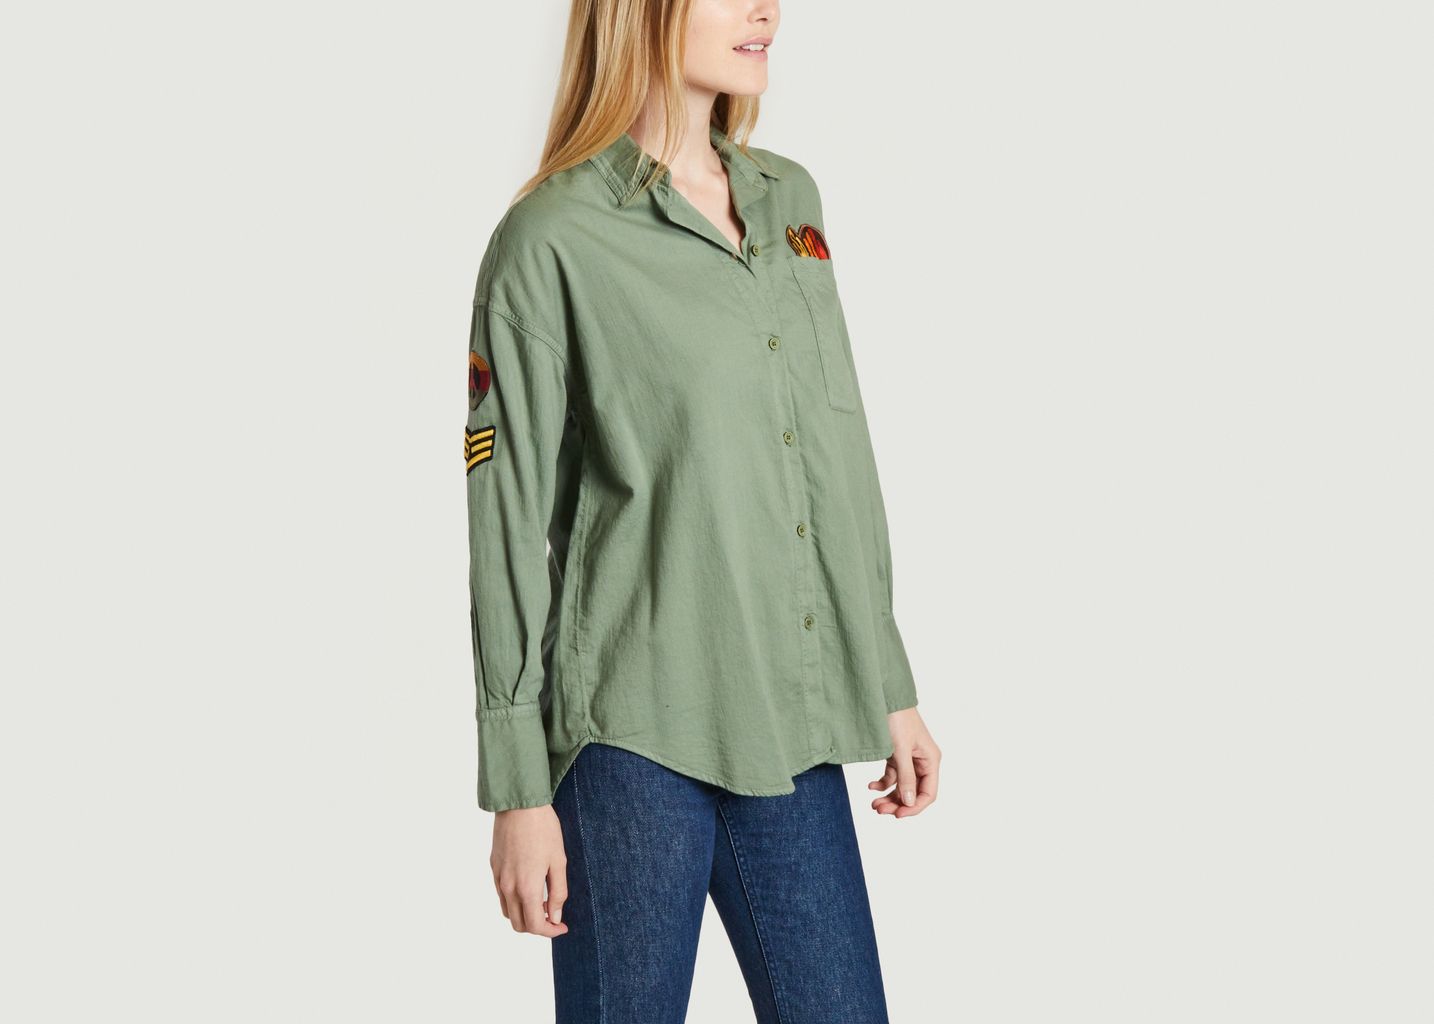 Celeste oversized shirt with patches - Five